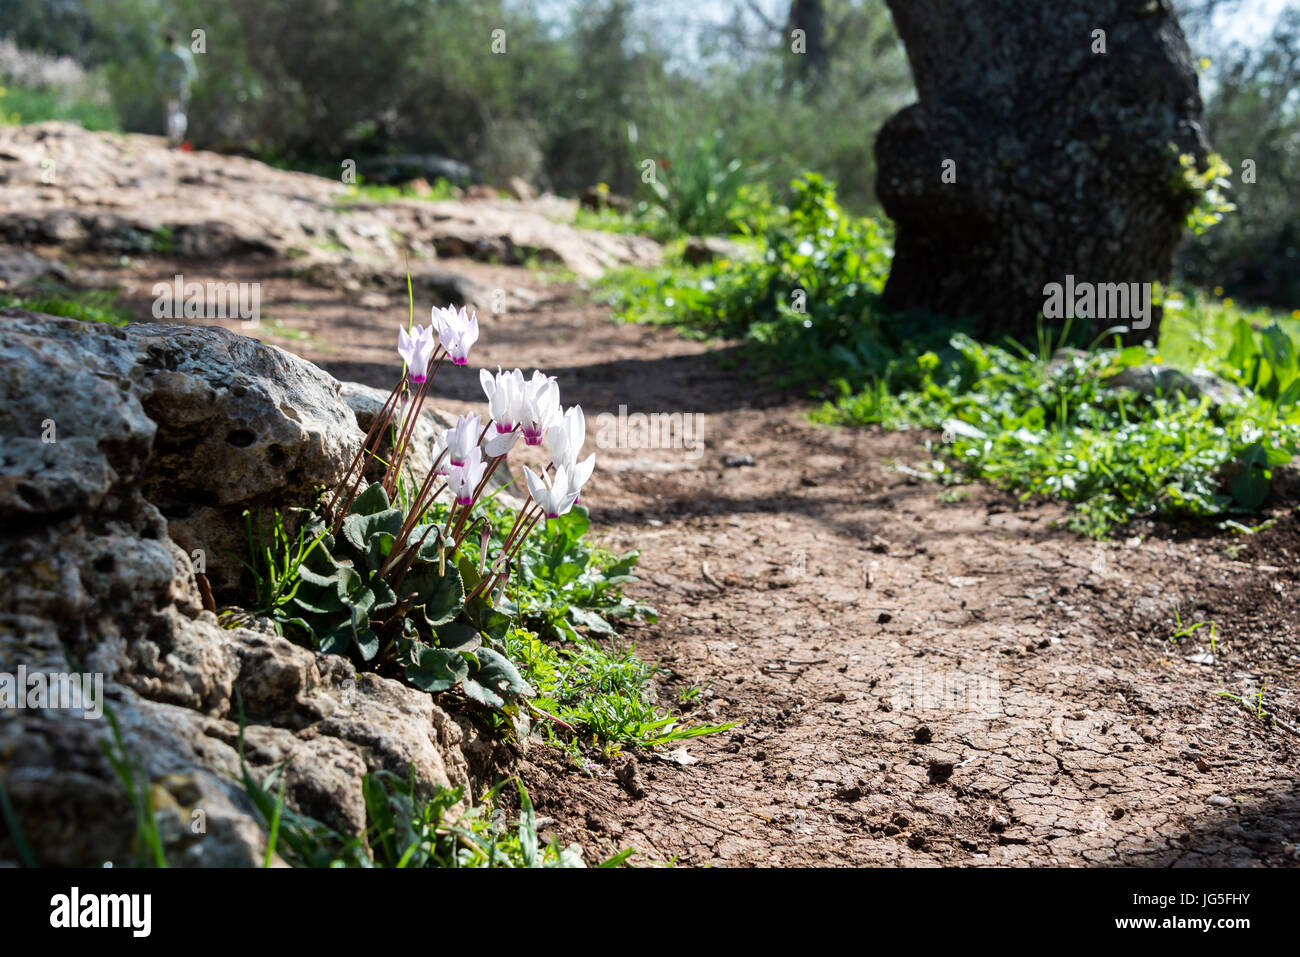 Alonei Abba nature reserve at Spring, Israel Stock Photo